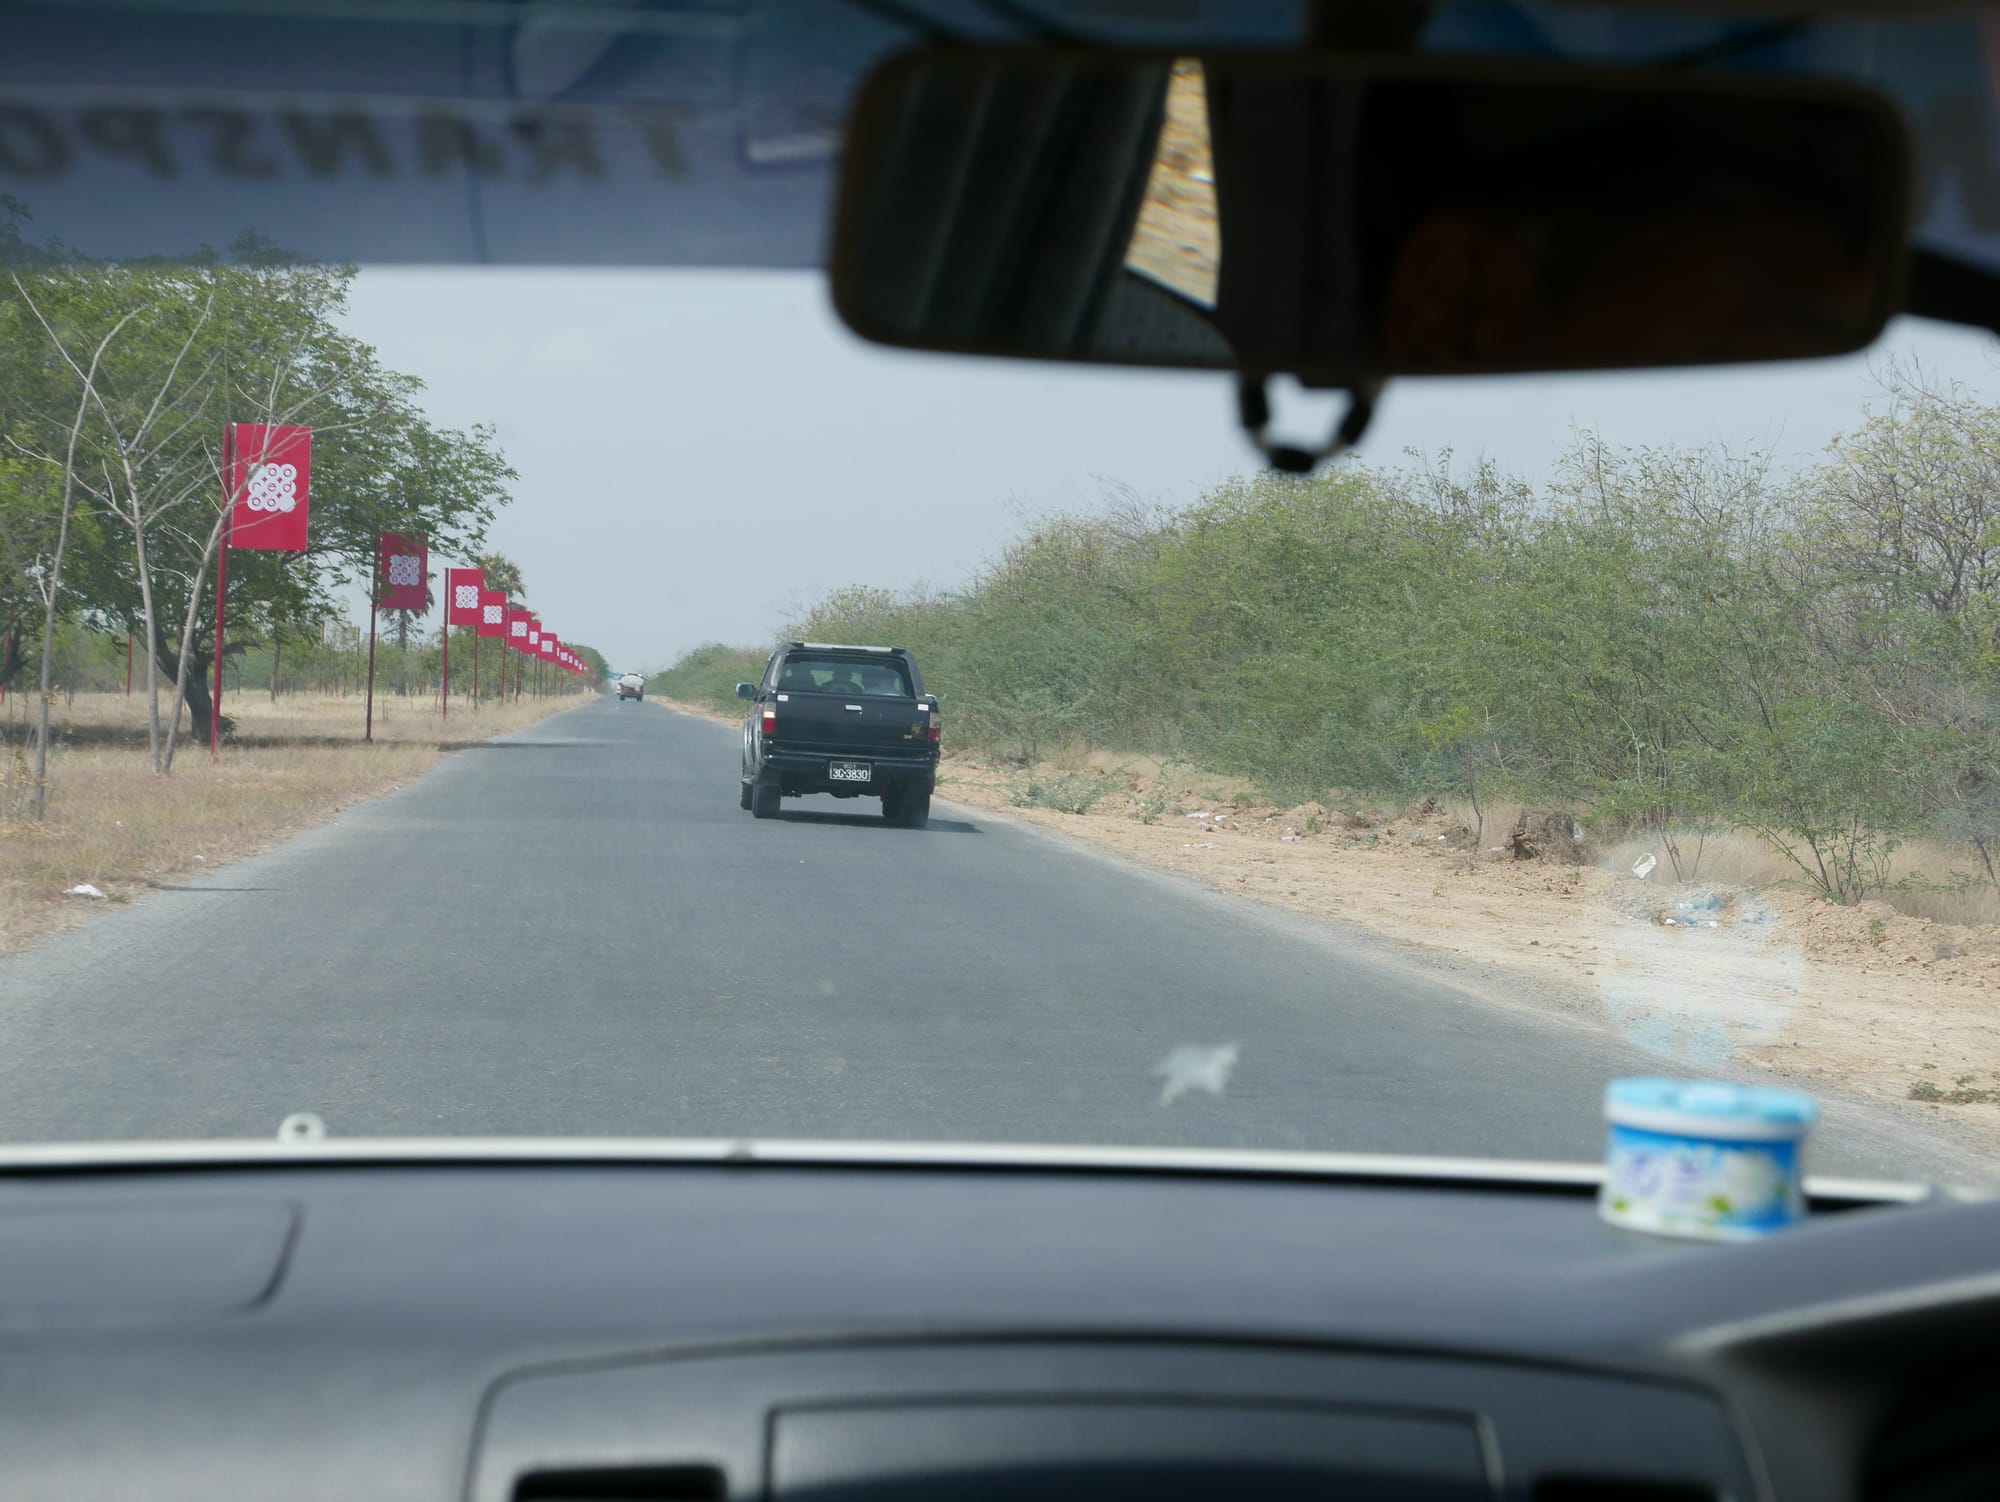 Photo by Author — driving from Mandalay International Airport (MDL) to Mandalay — the view from the cab